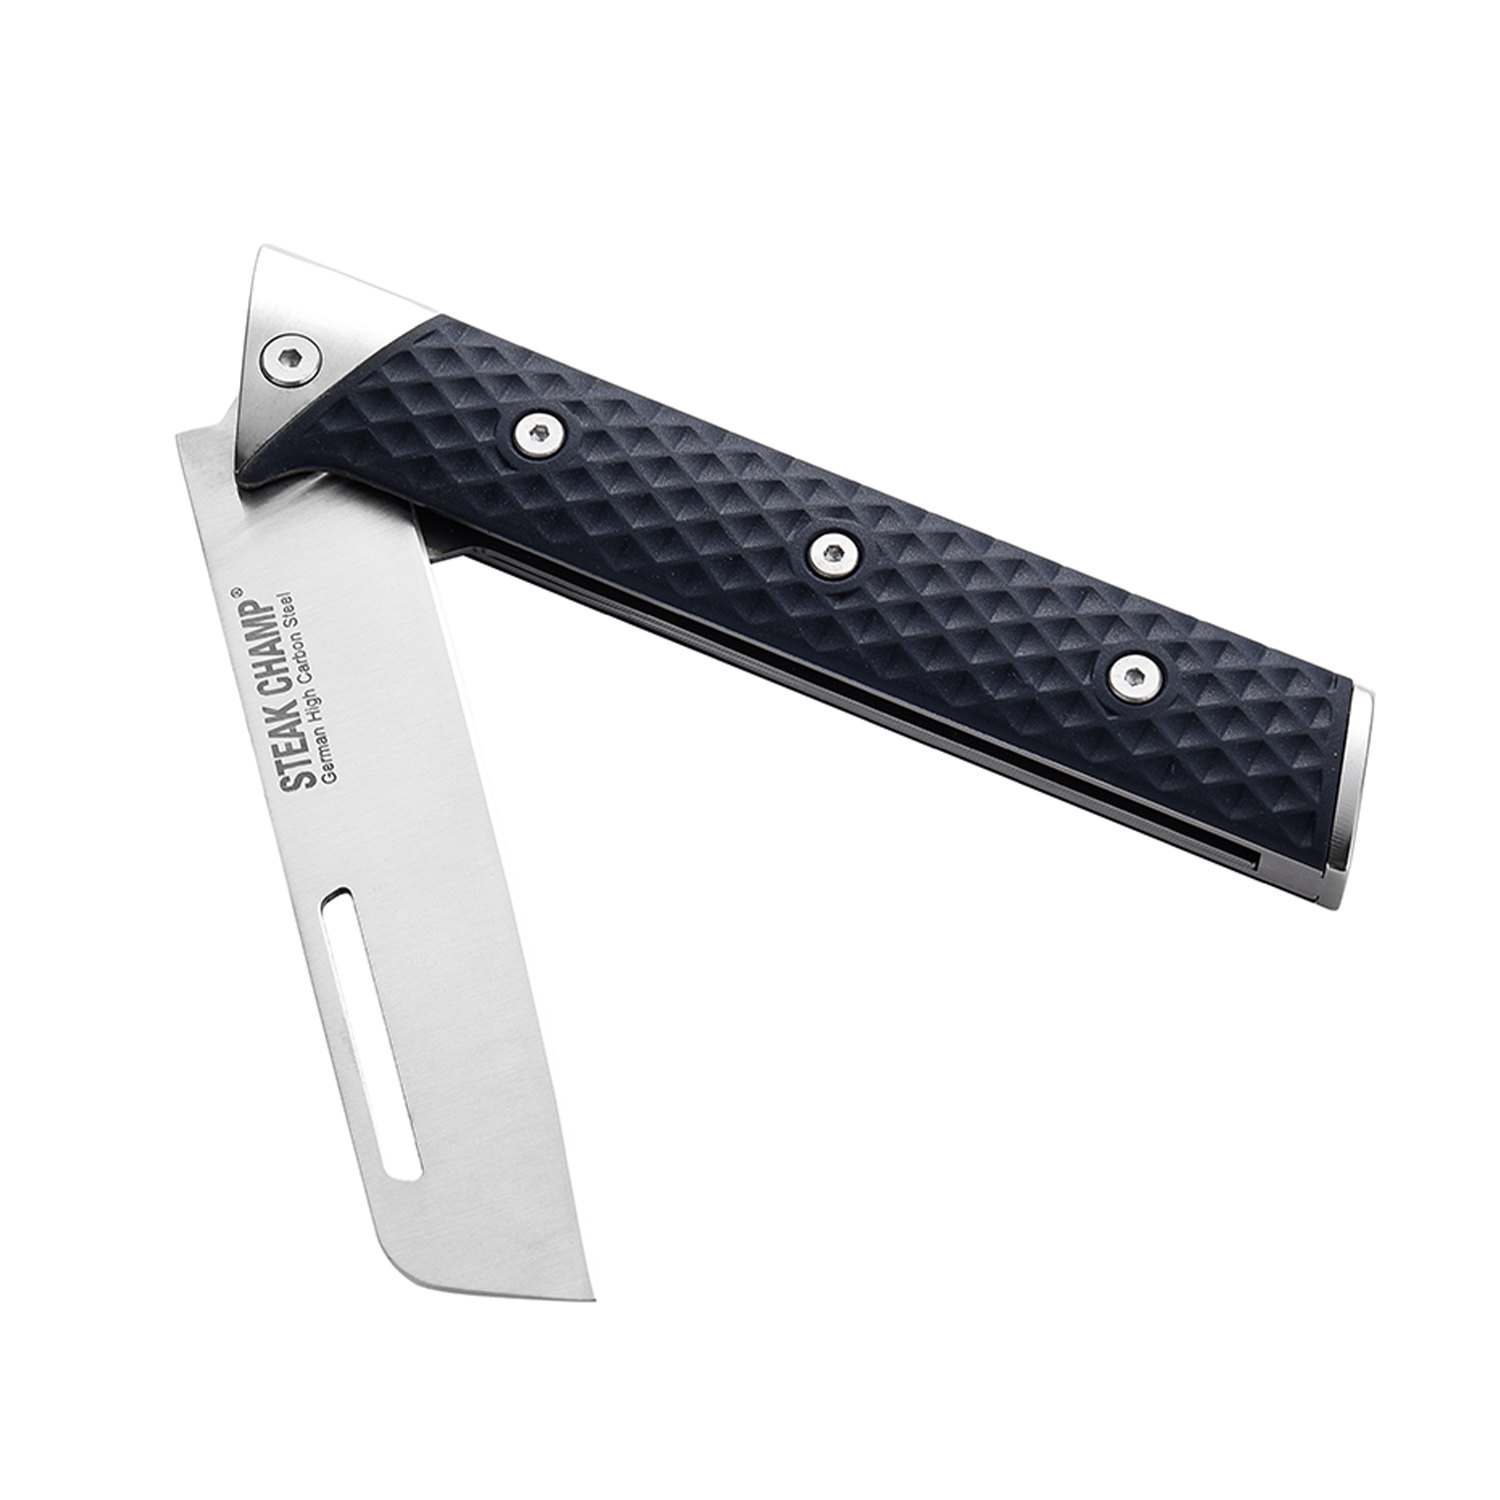  Chef's Outdoor Folding Knife 10 5005 